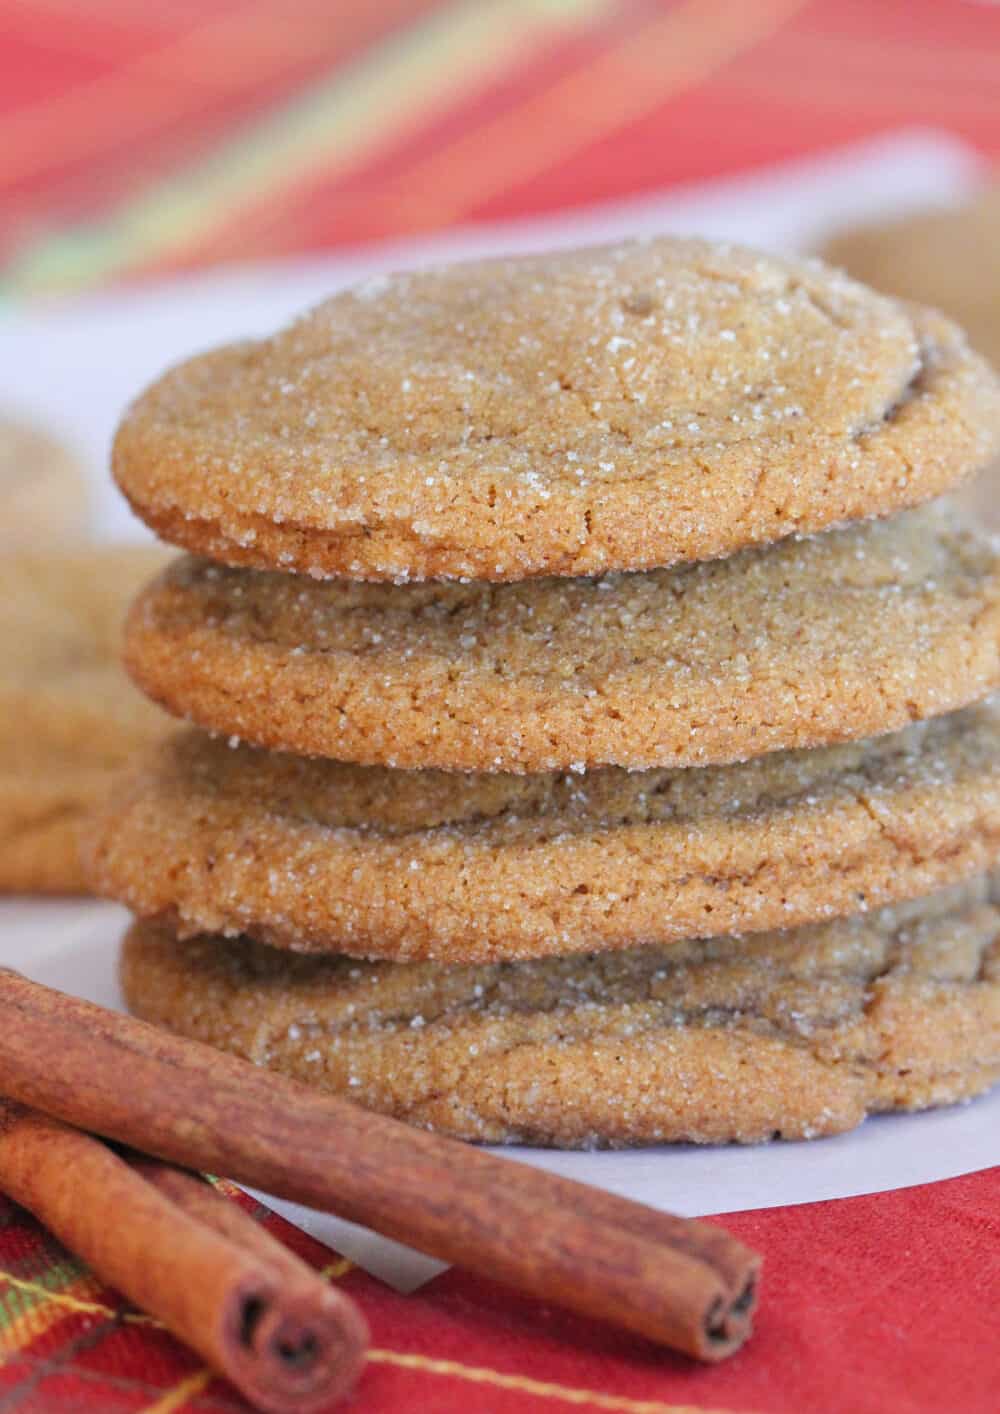 stacked gingersnap cookies